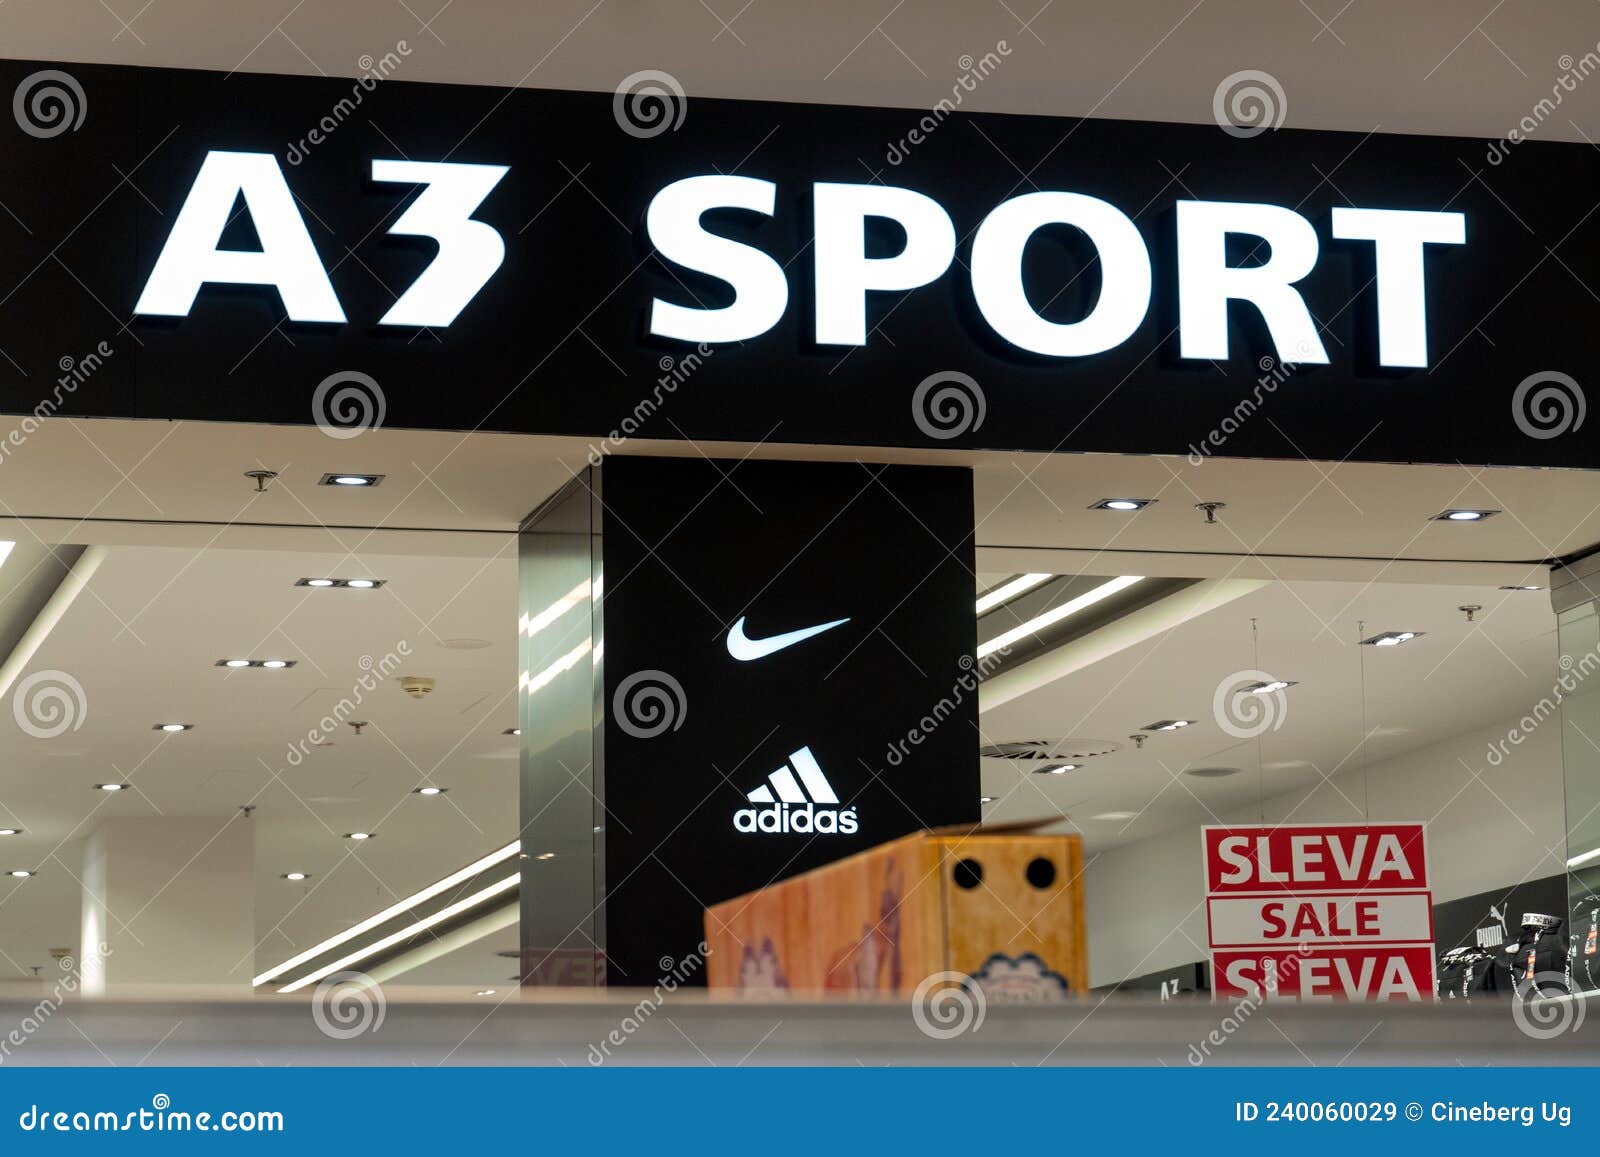 Bage gået vanvittigt Settlers A3 sport store editorial stock image. Image of facade - 240060029